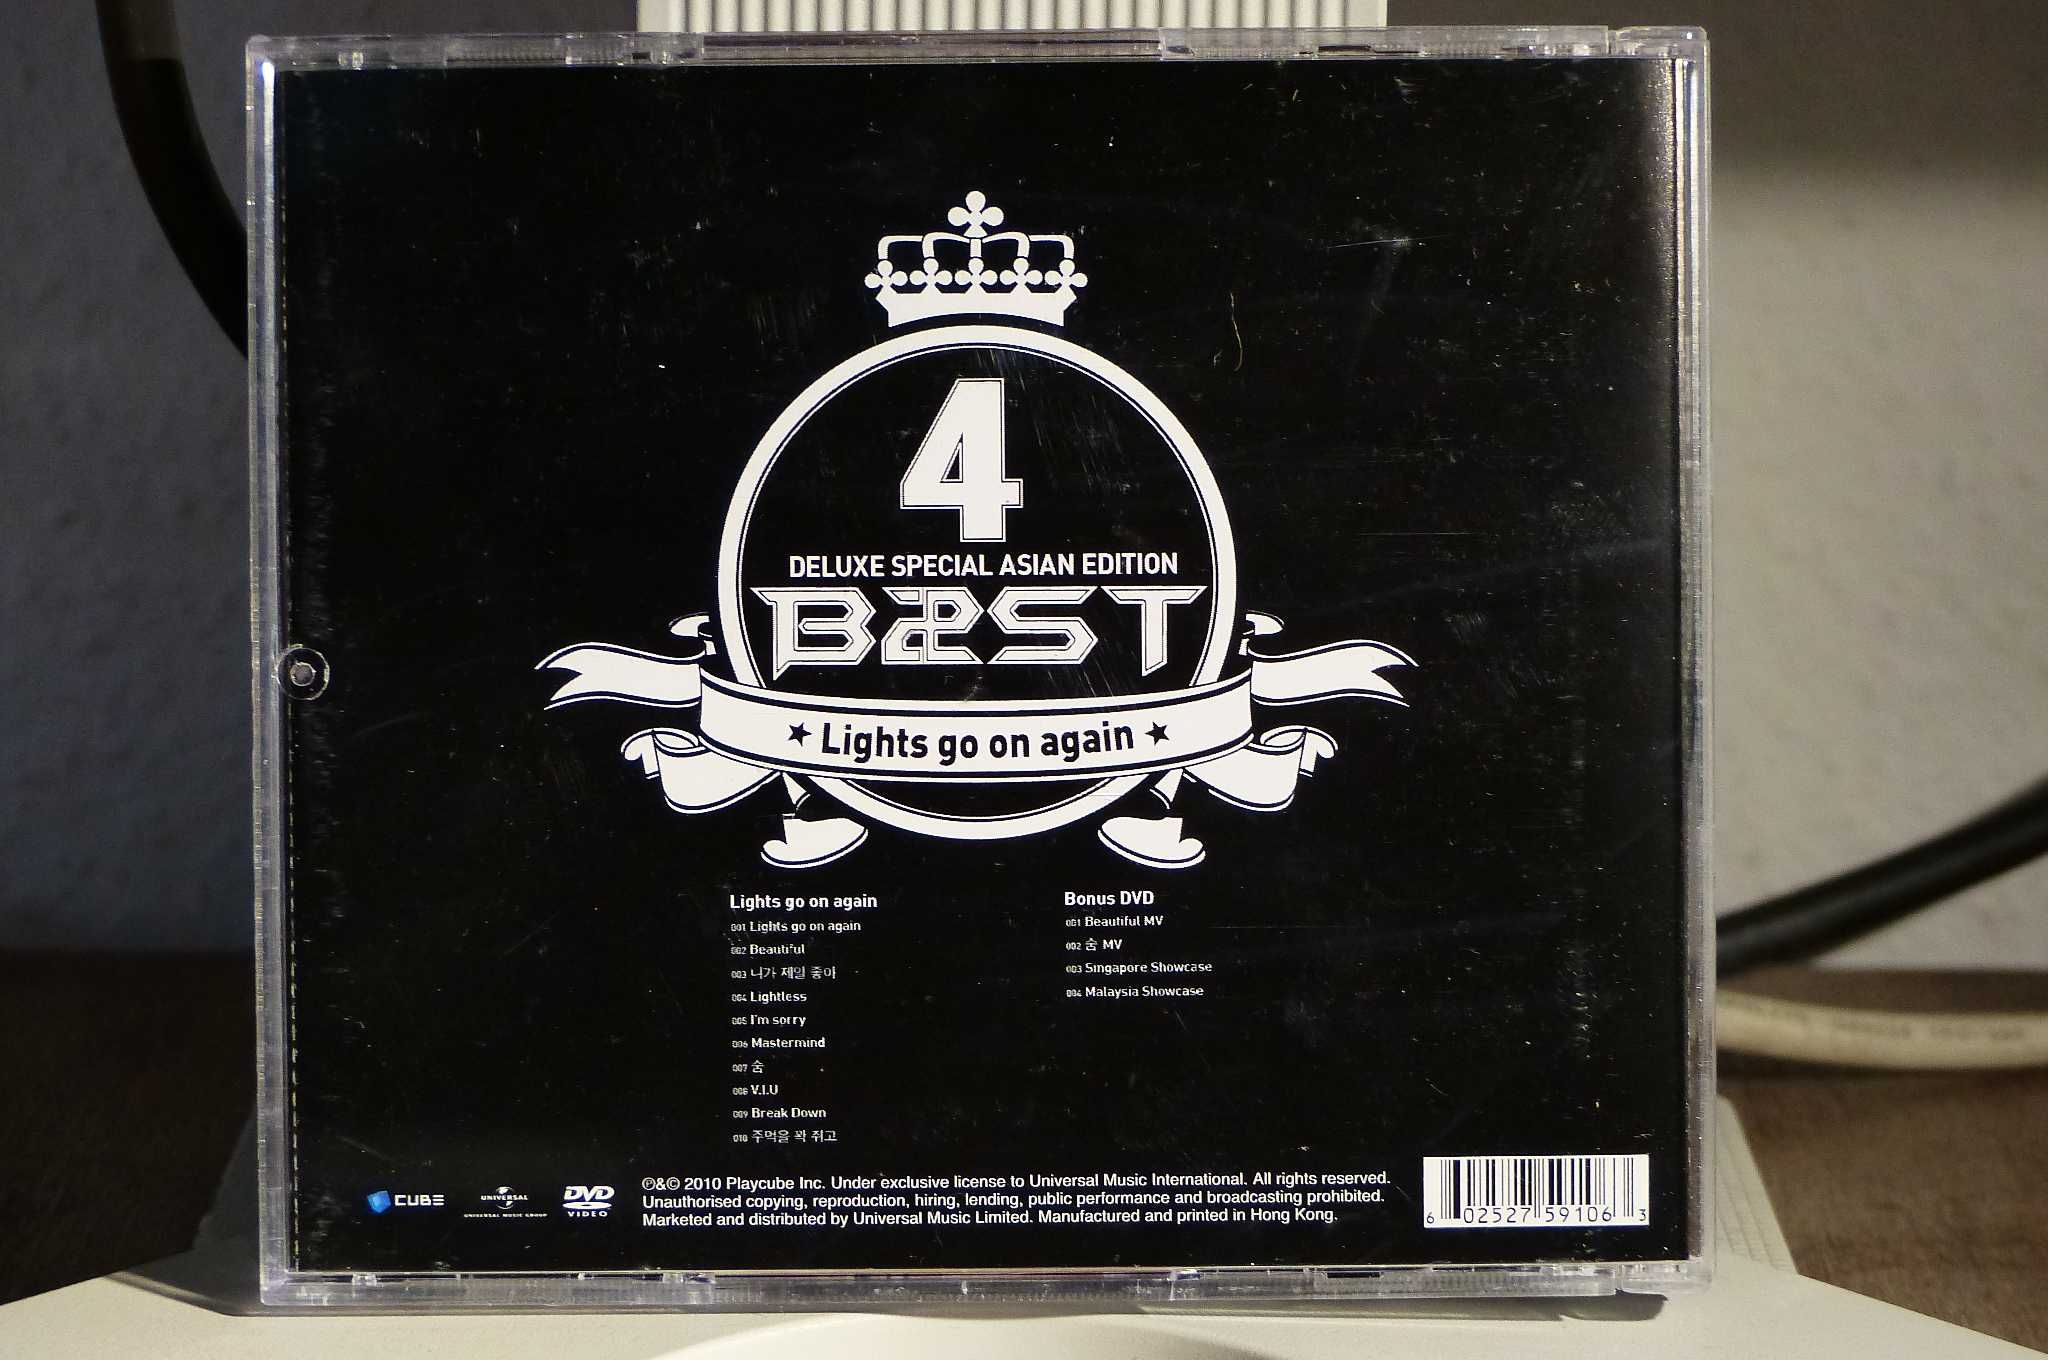 CD DVD B2ST Lights Go On Again (Deluxe Special Asian Edition) K-pop